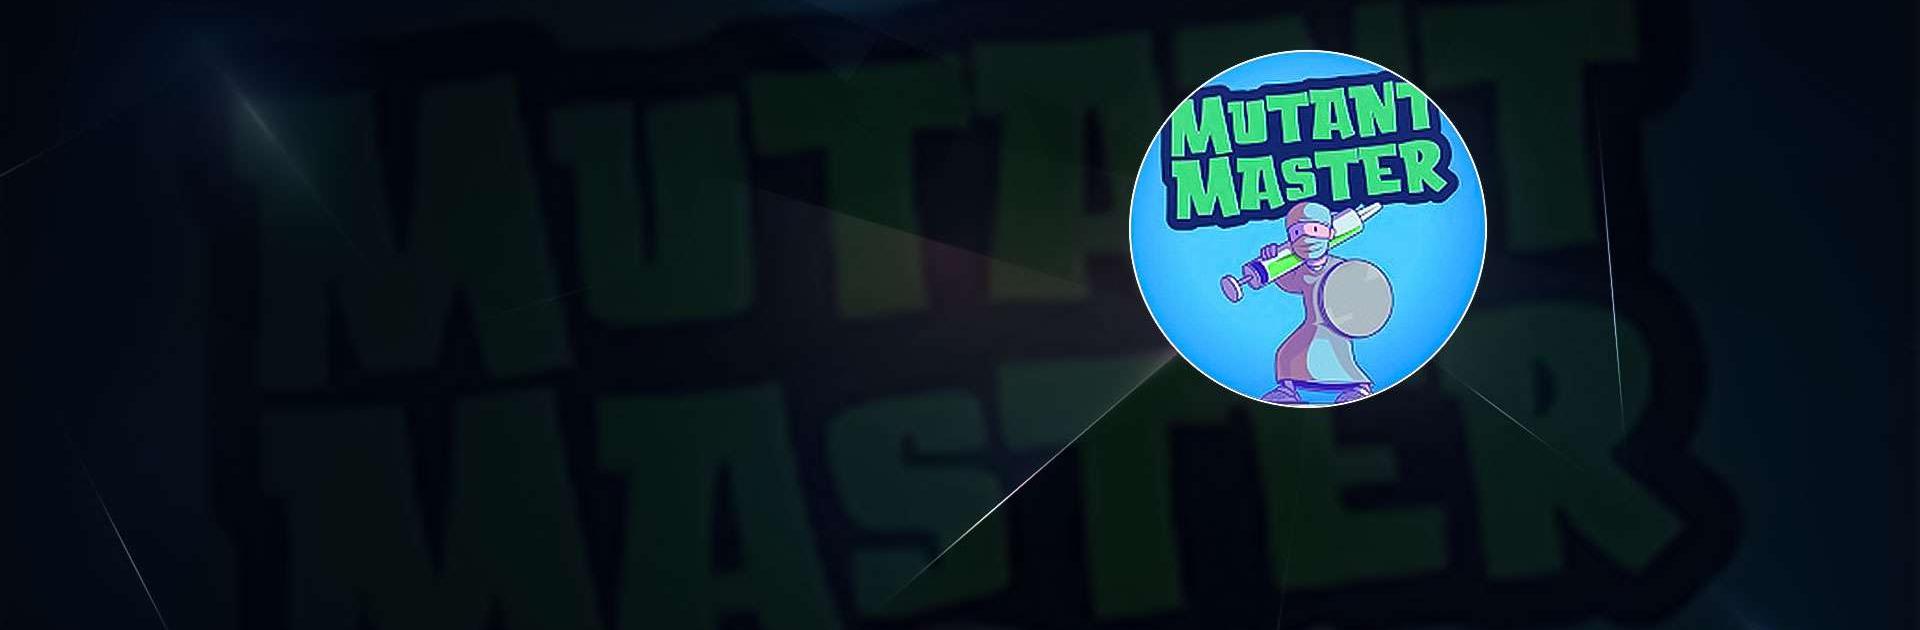 Play Mutant Master - Gang Potion Online